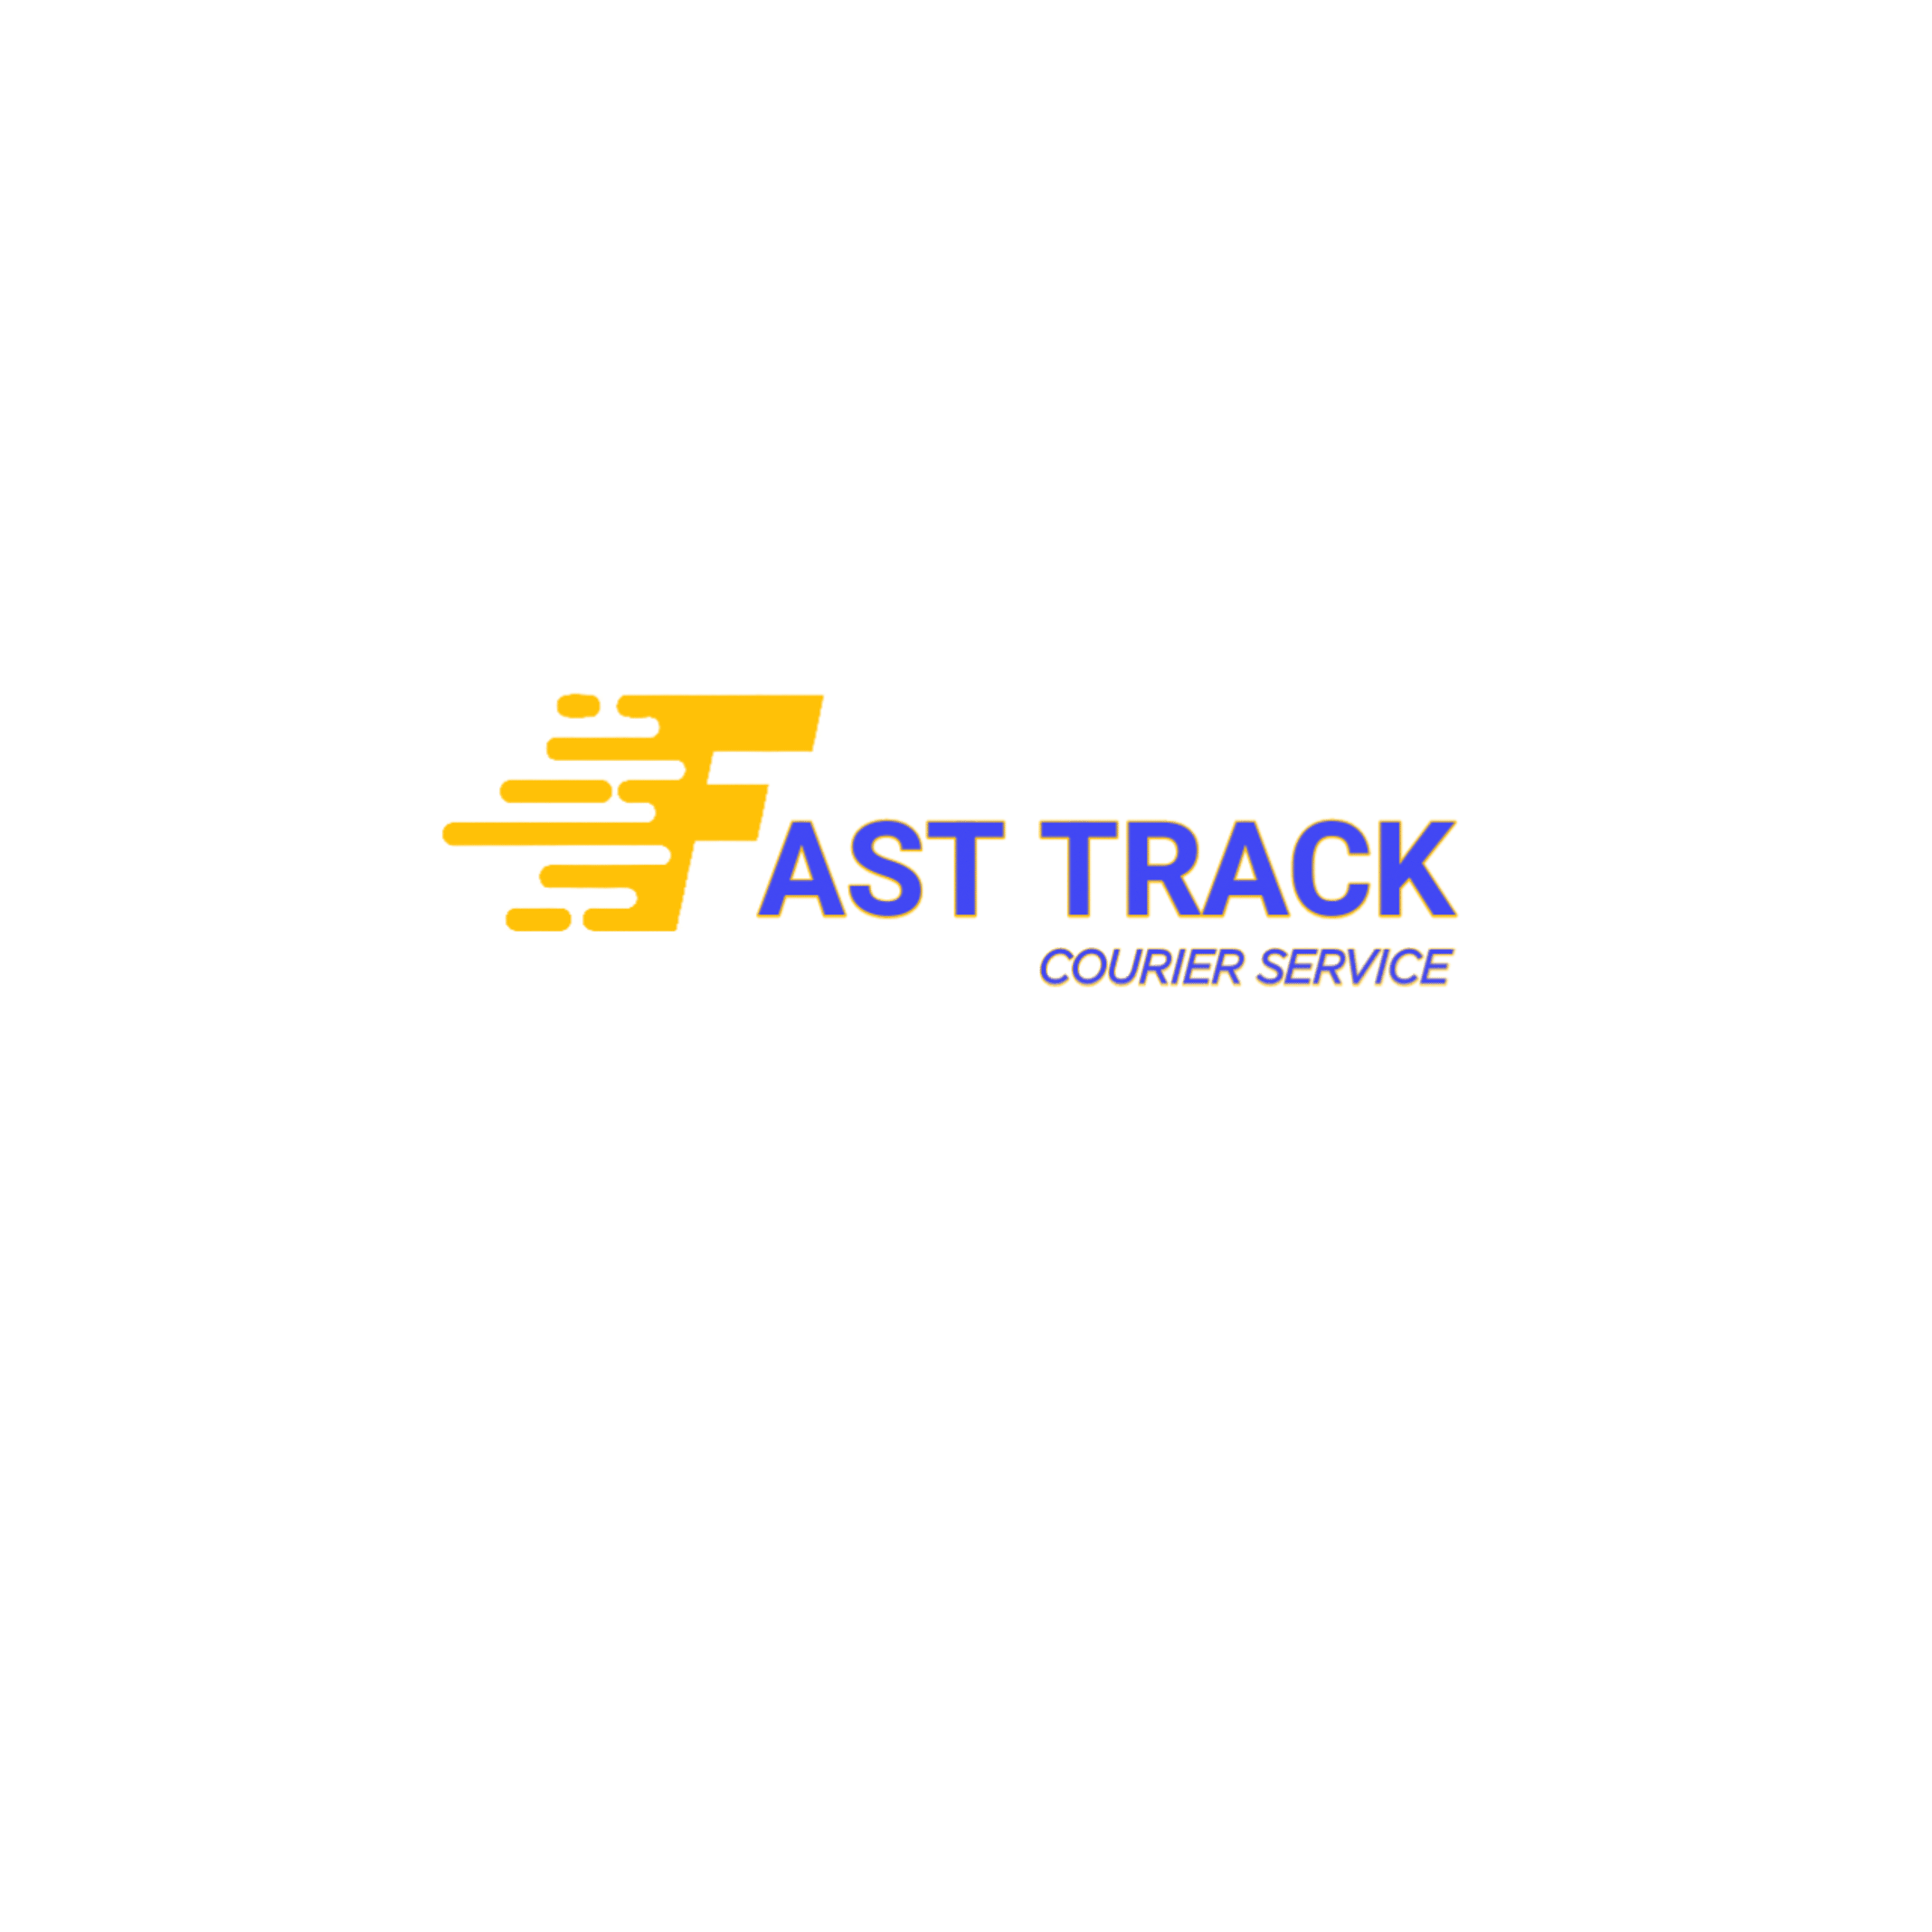 Fast Track Courier Service